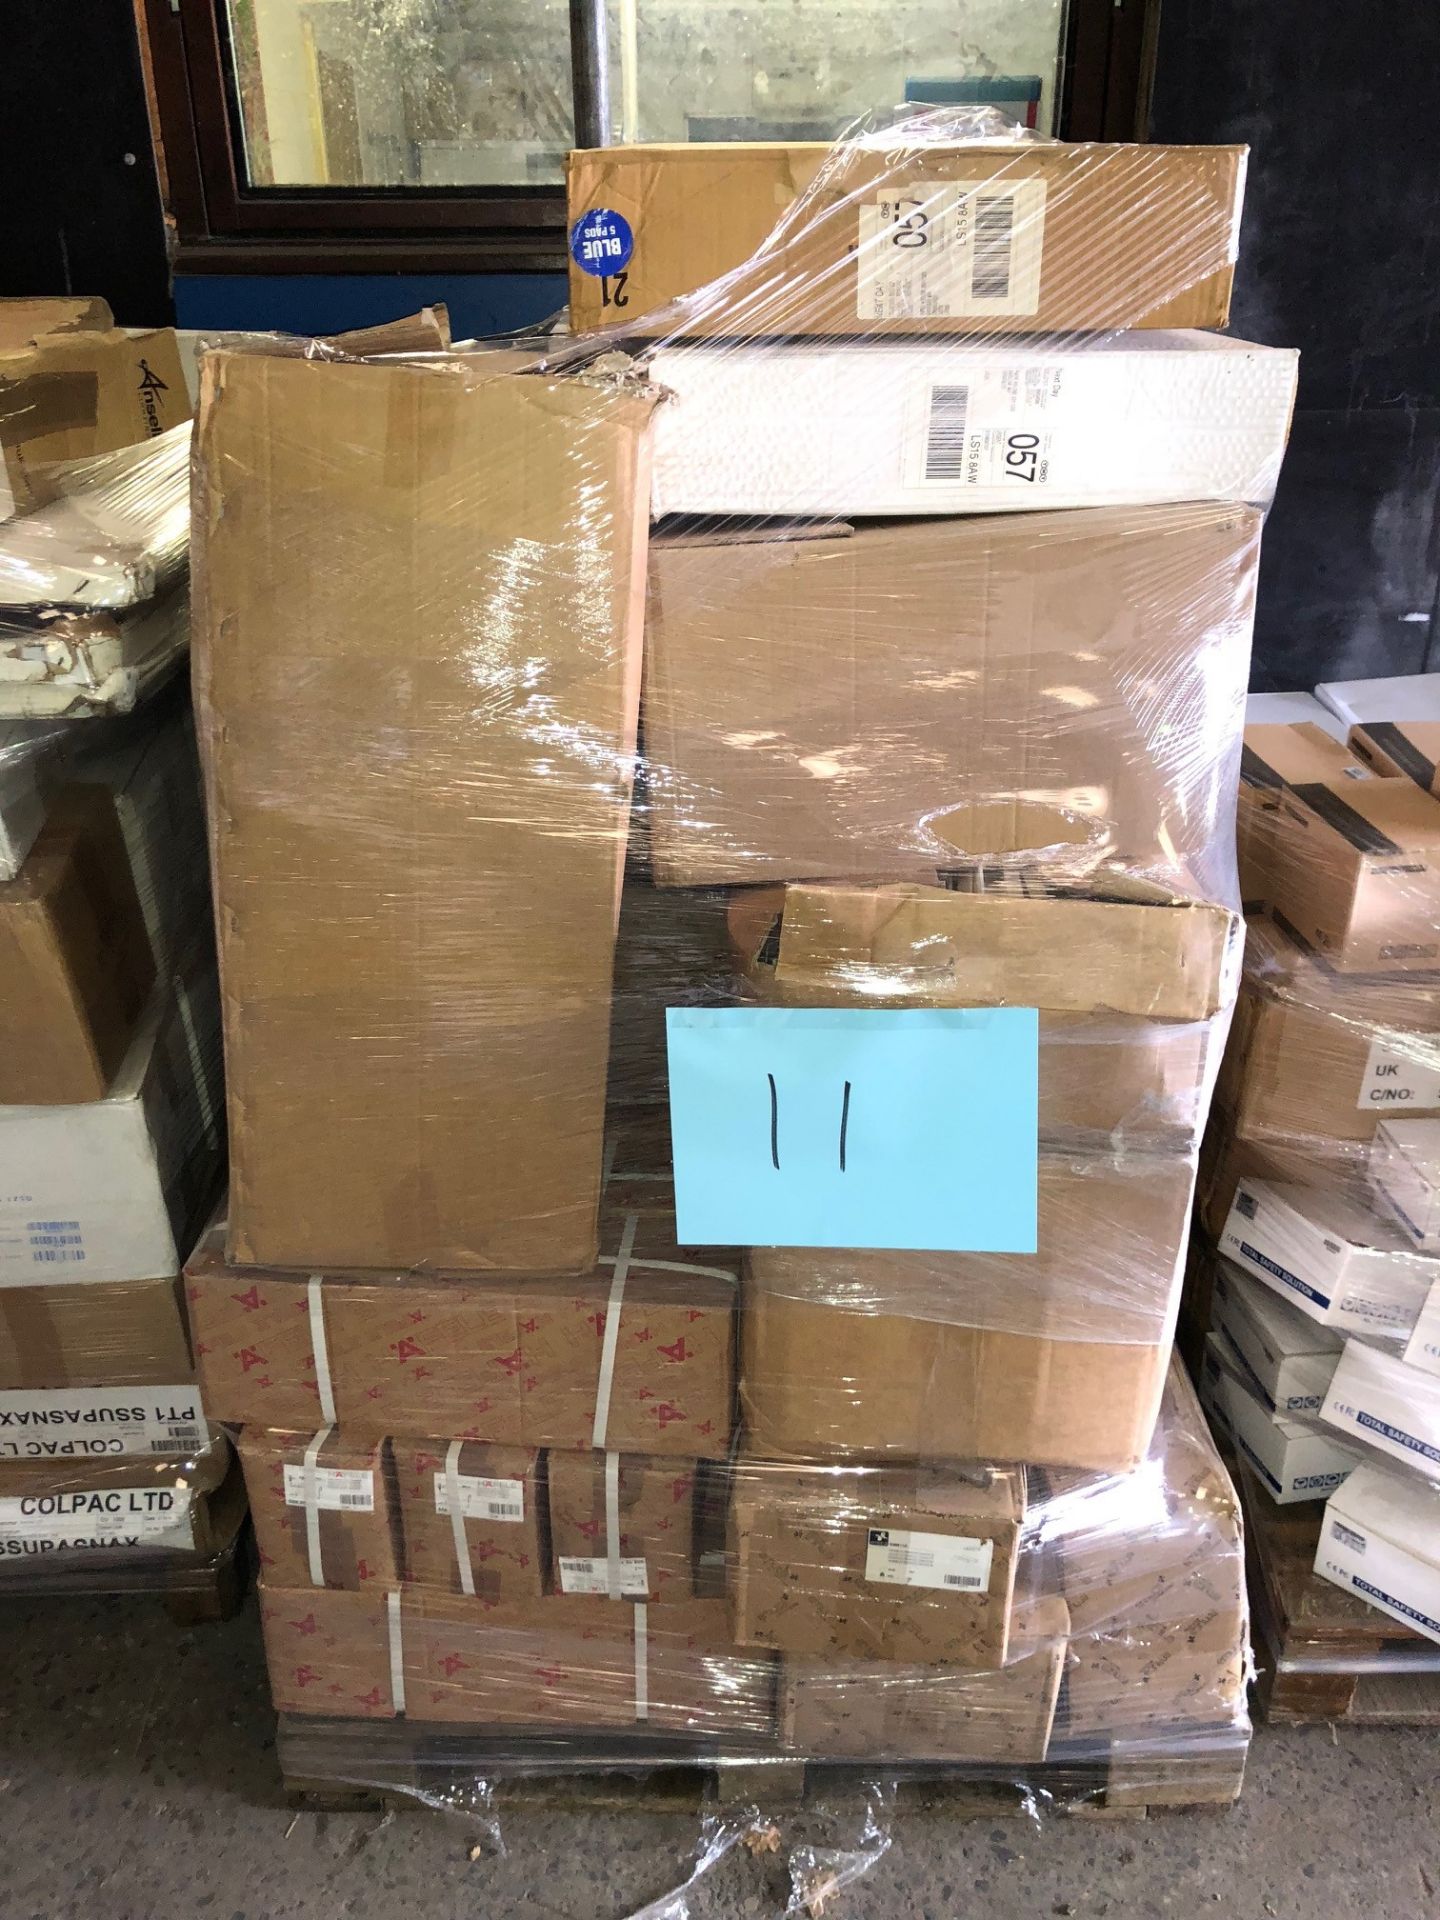 1 x Pallet of Mixed Stock Including Emuca Products, HDMi Cable Kits, Stationery Items & Various